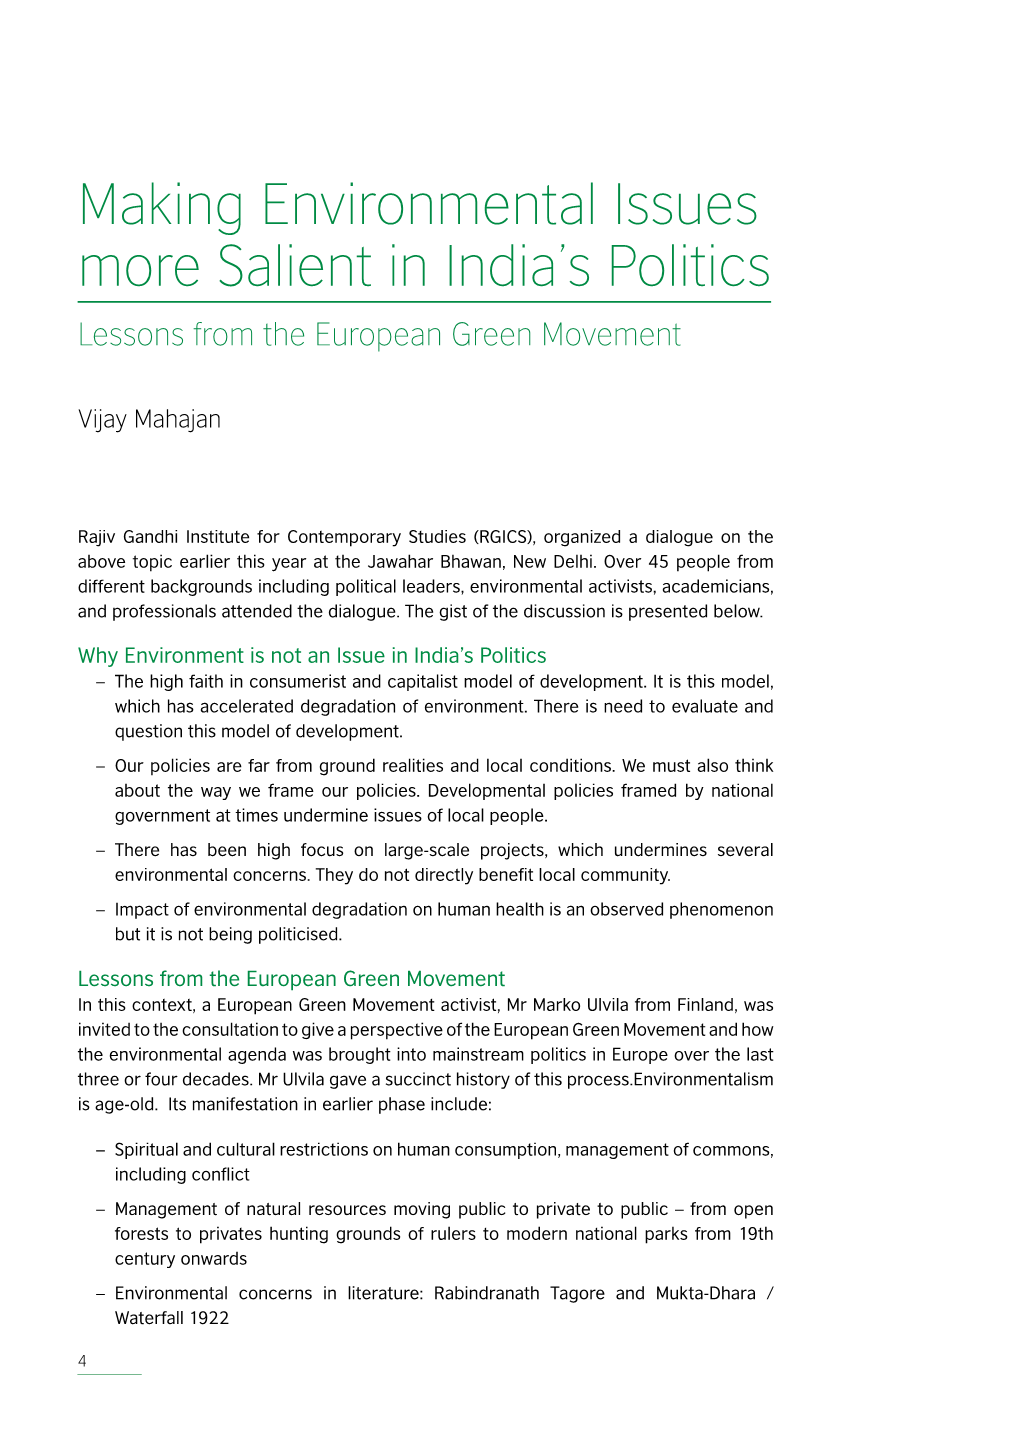 Making Environmental Issues More Salient in India's Politics